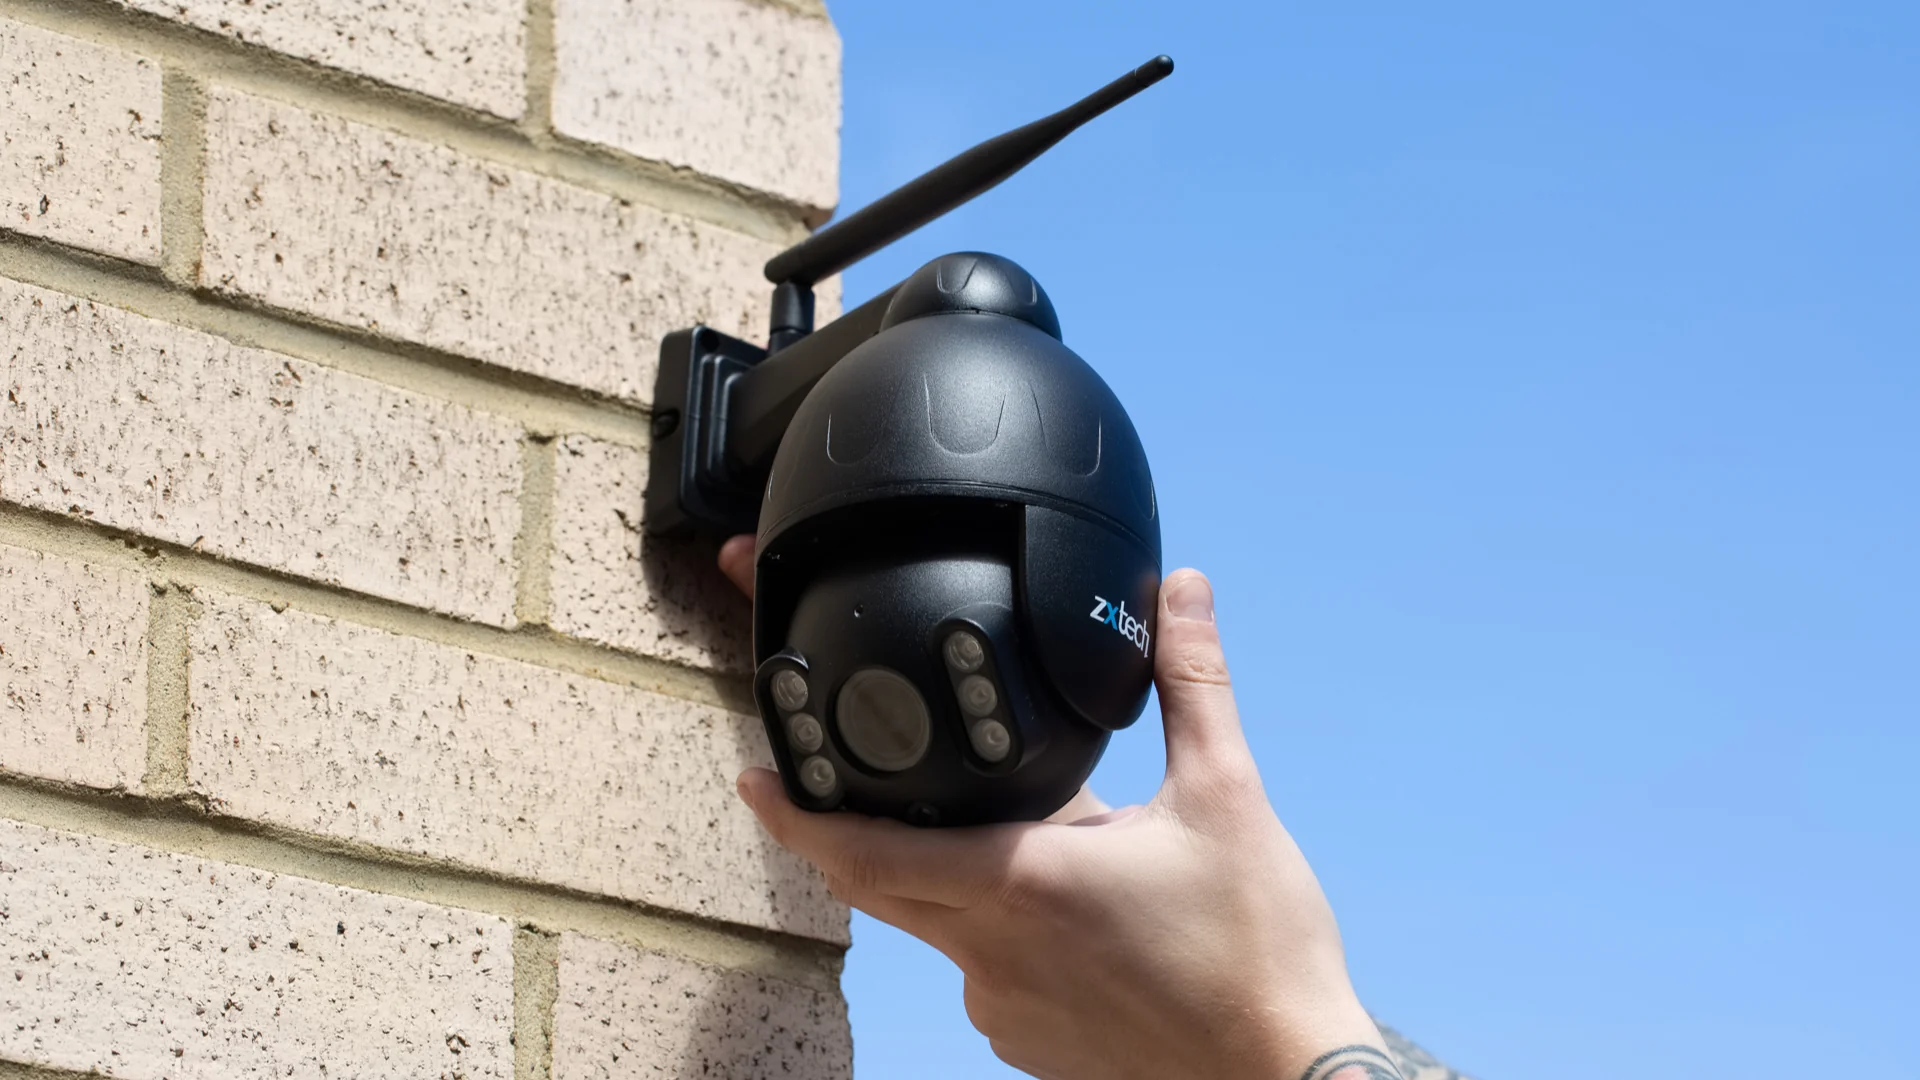 How To Connect A Wi-Fi Security Camera